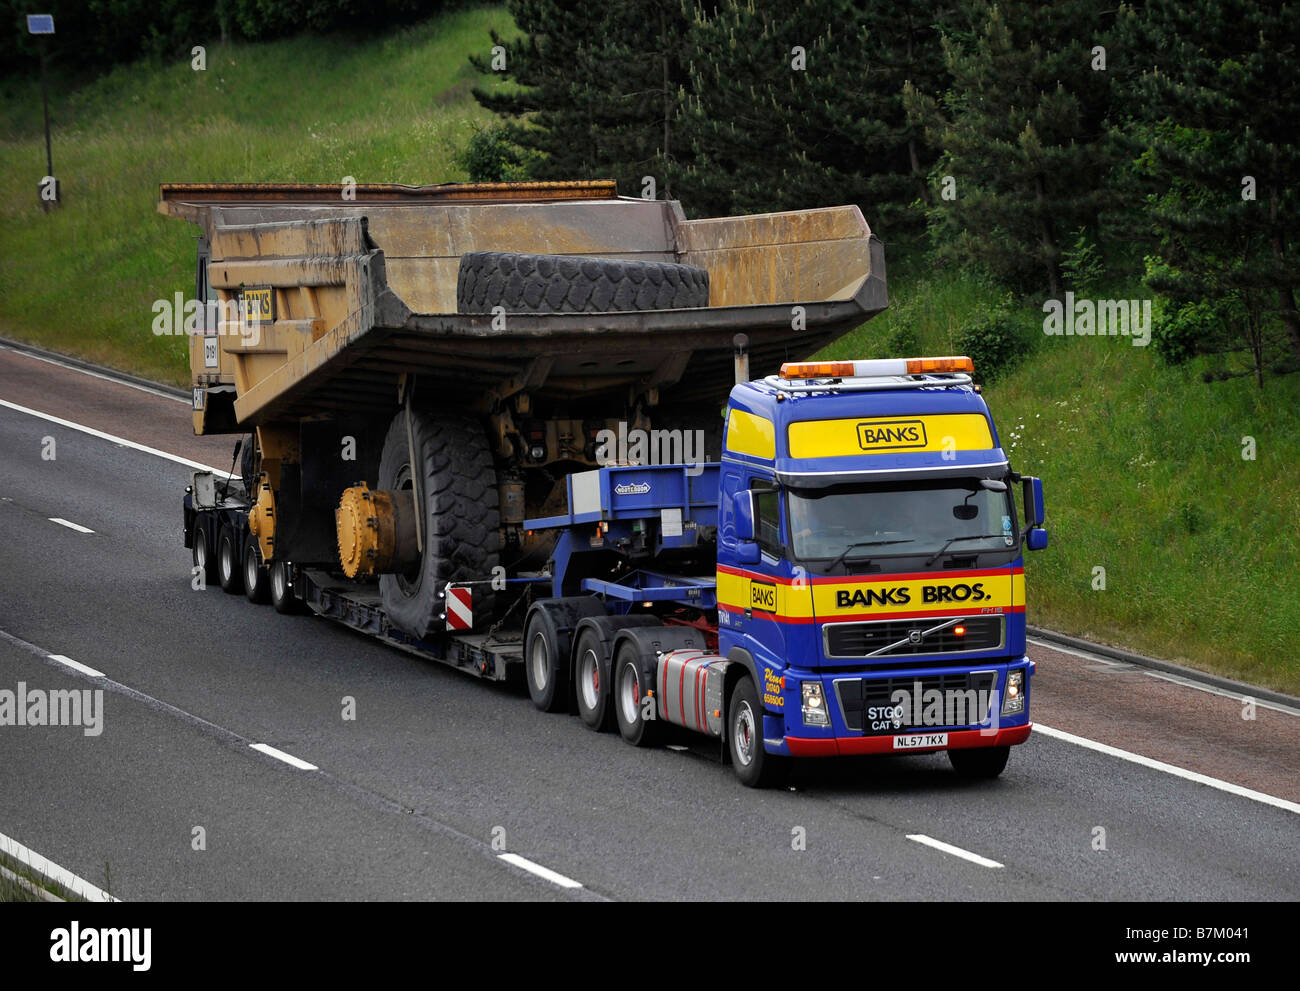 Banks Volvo FH heavy haulage truck carrying a giant dump truck wide abnormal load on the motorway Stock Photo